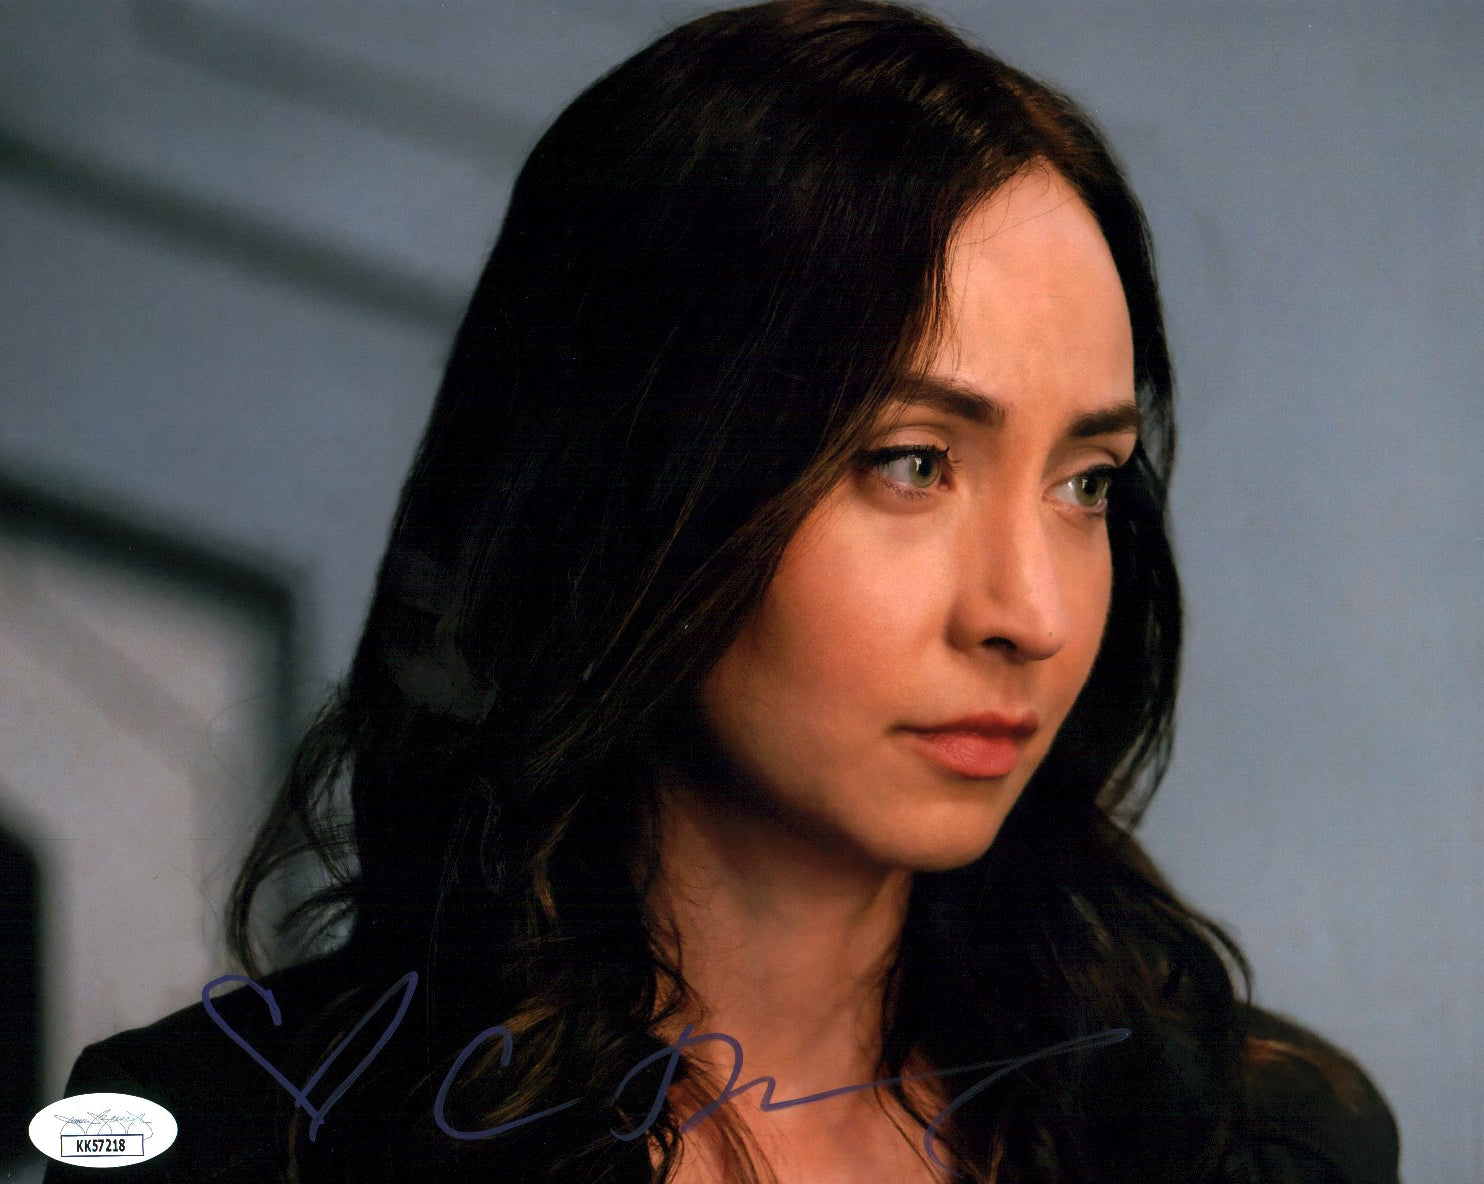 Courtney Ford DC Legends of Tomorrow 8x10 Signed Photo JSA COA Certified Autograph